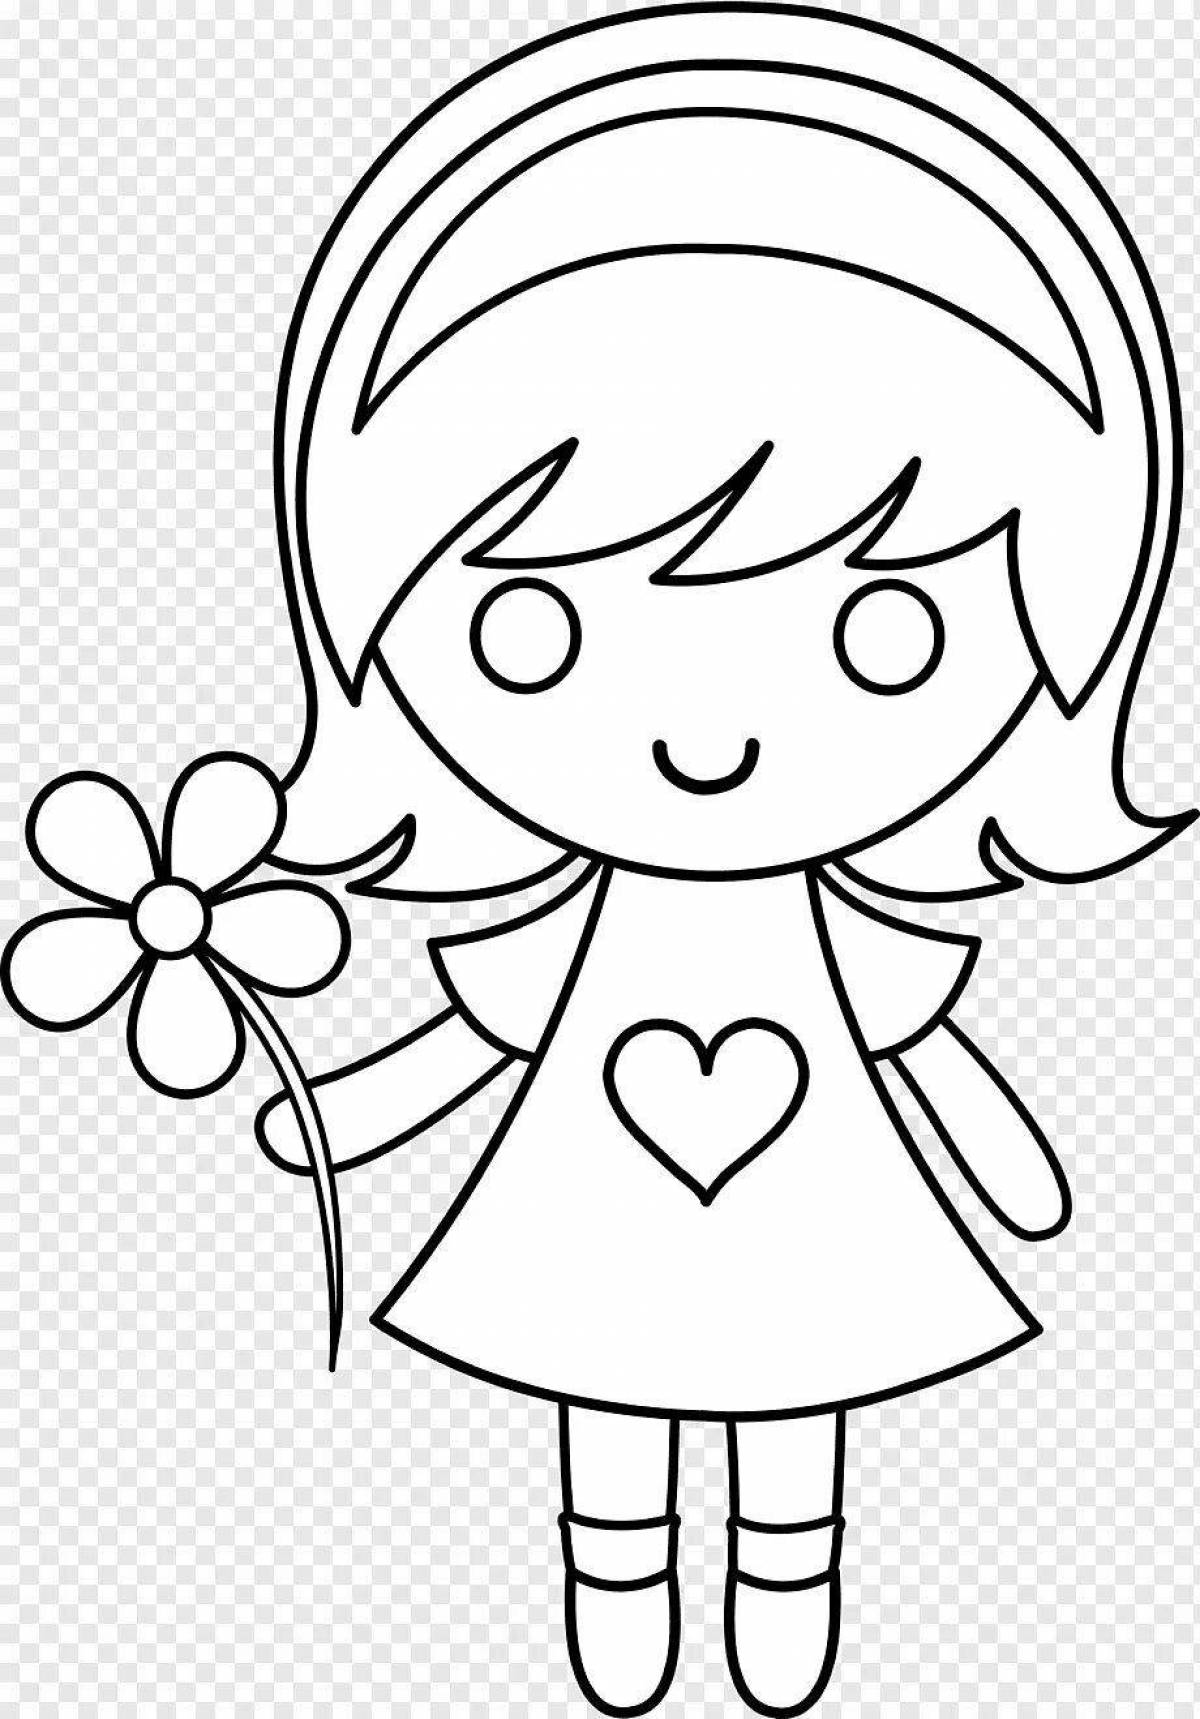 Amazing coloring pages for girls, easy and beautiful